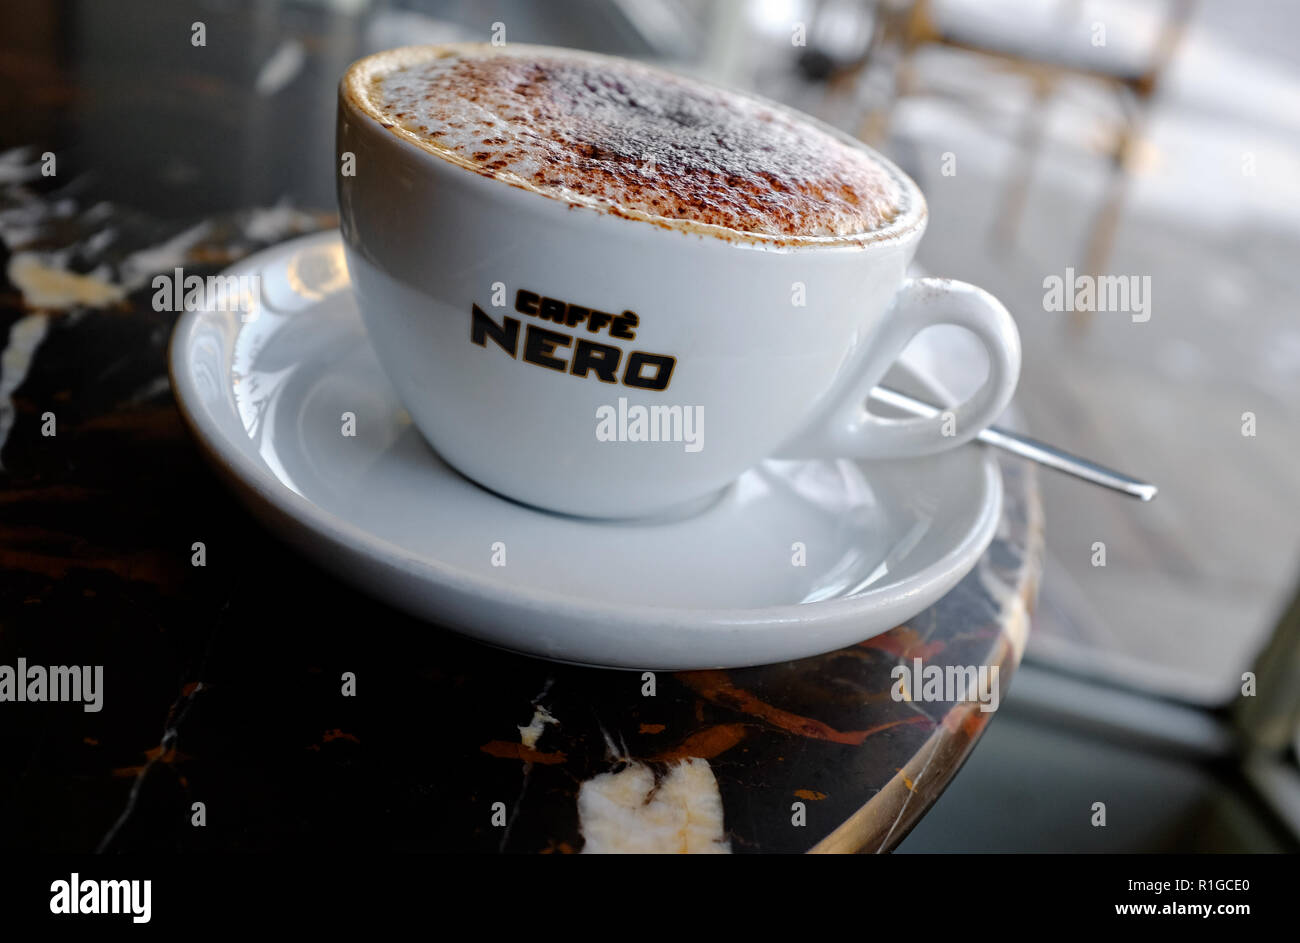 caffe nero cappuccino coffee in white cup and saucer Stock Photo